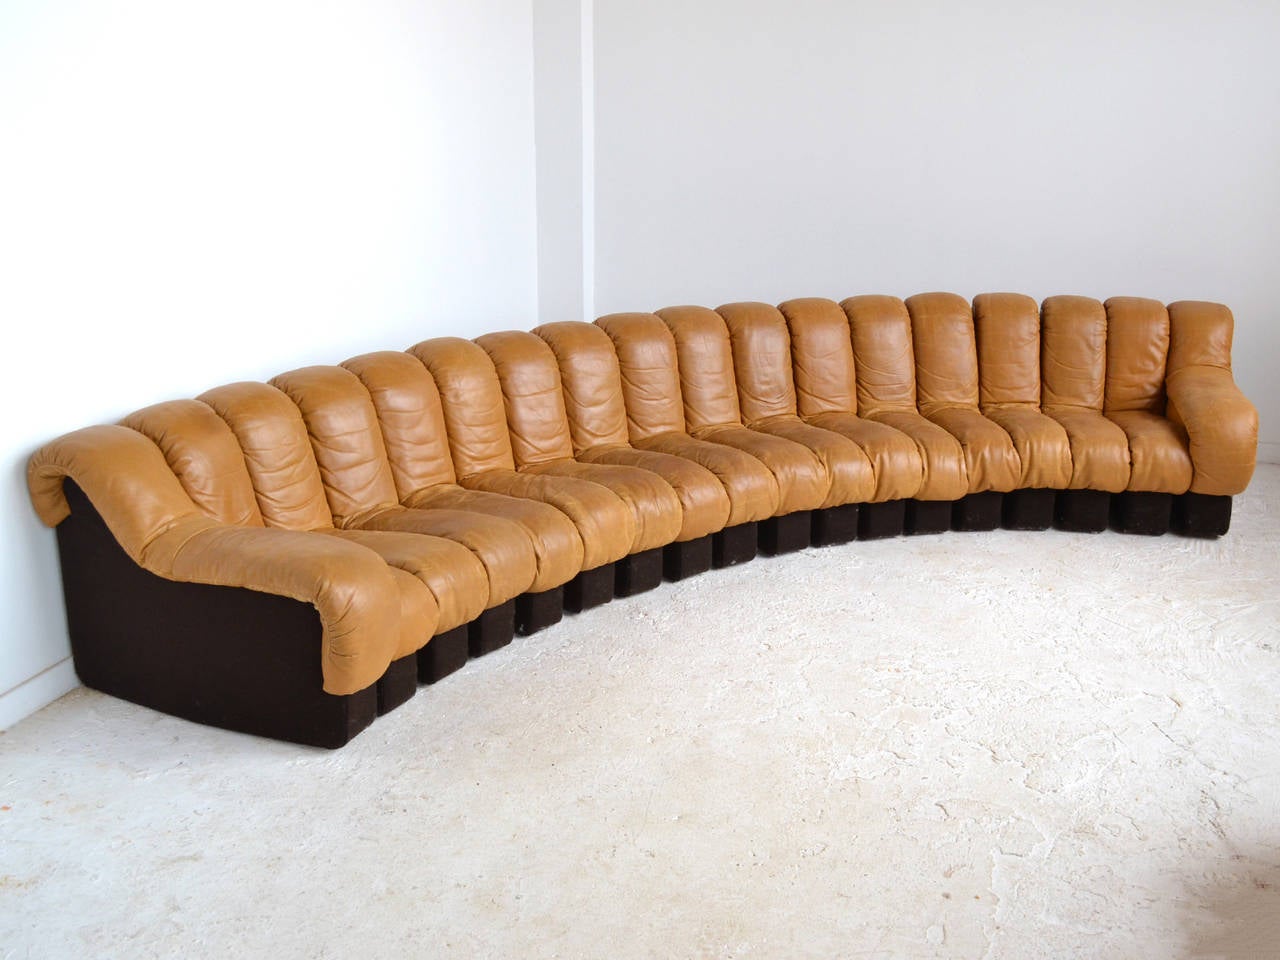 This fantastic 18-piece DS 600 organic sofa by Ueli bergere, Eleanora Peduzzi-Riva and Heinz Ulrich for De Sede/ Stendig is upholstered in a richly patinated caramel-colored leather and dark brown felt. The versatile design features thin segments